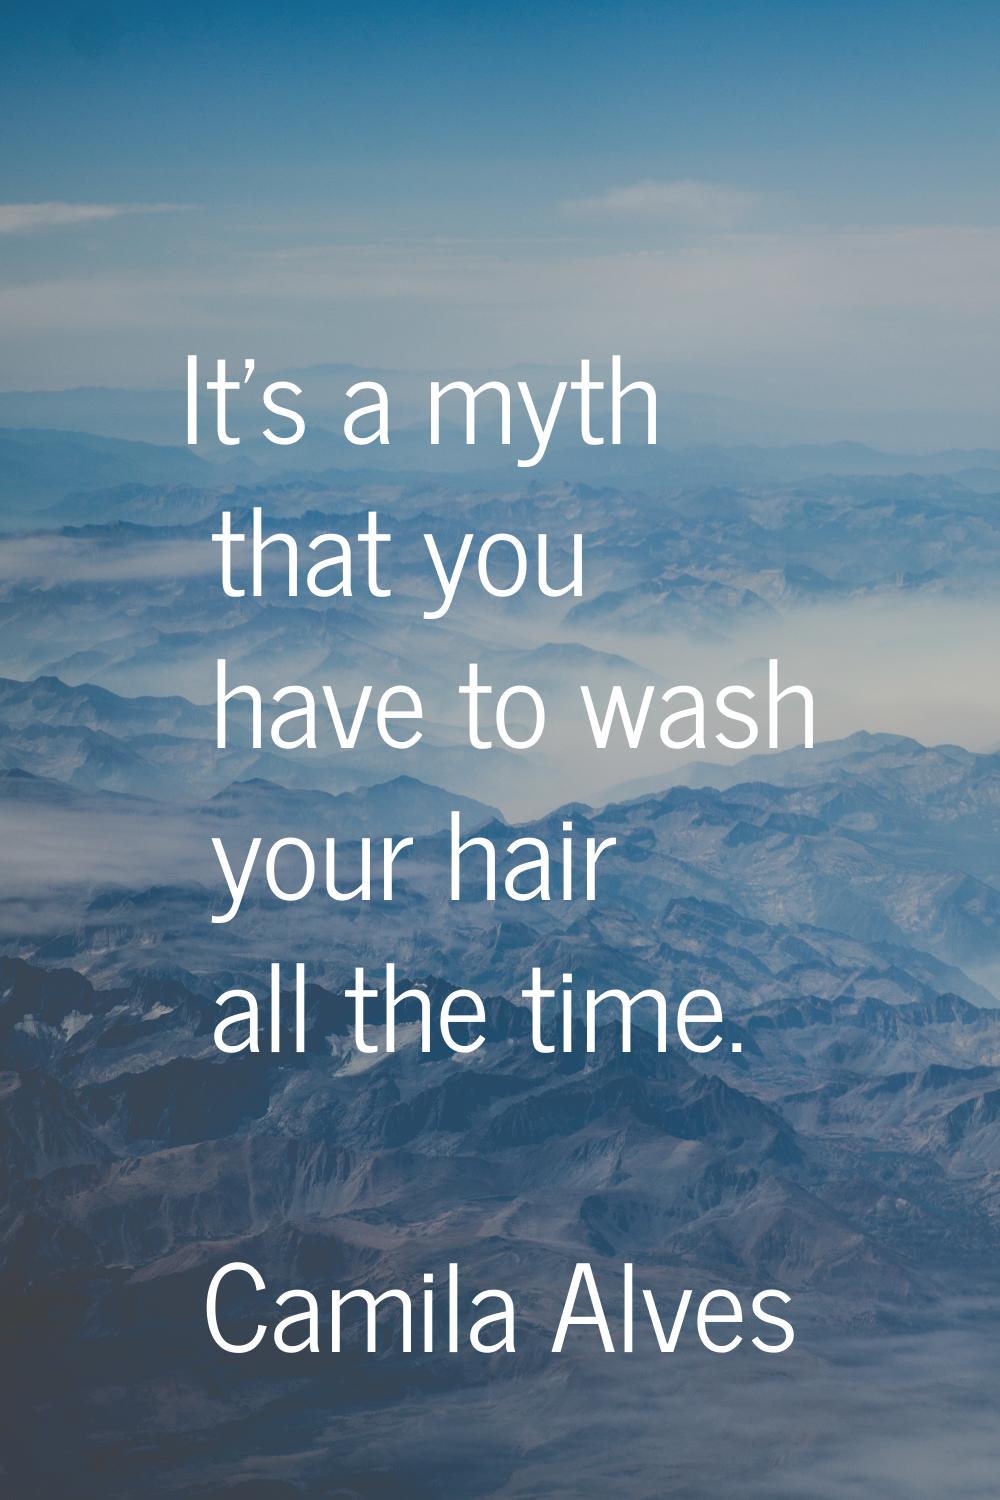 It's a myth that you have to wash your hair all the time.